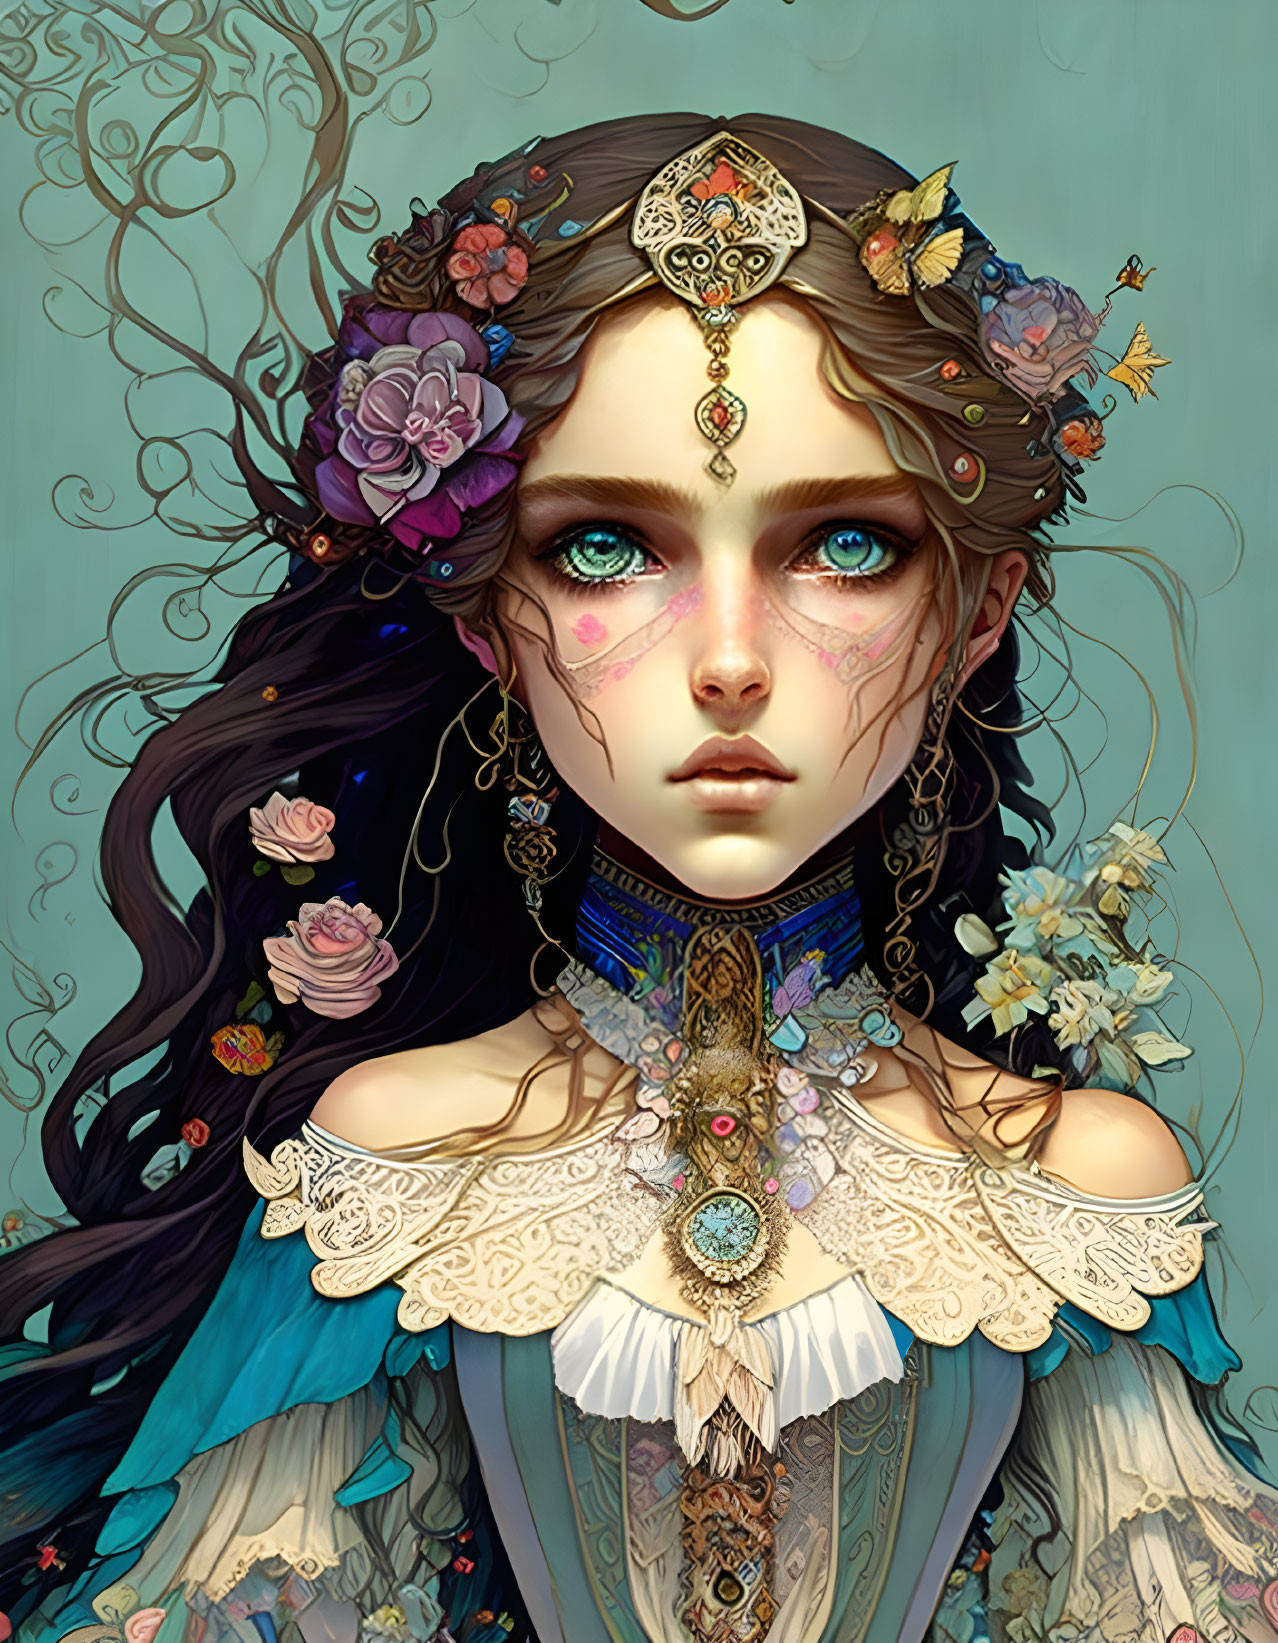 Fantasy female character digital portrait with intricate jewelry and floral elements